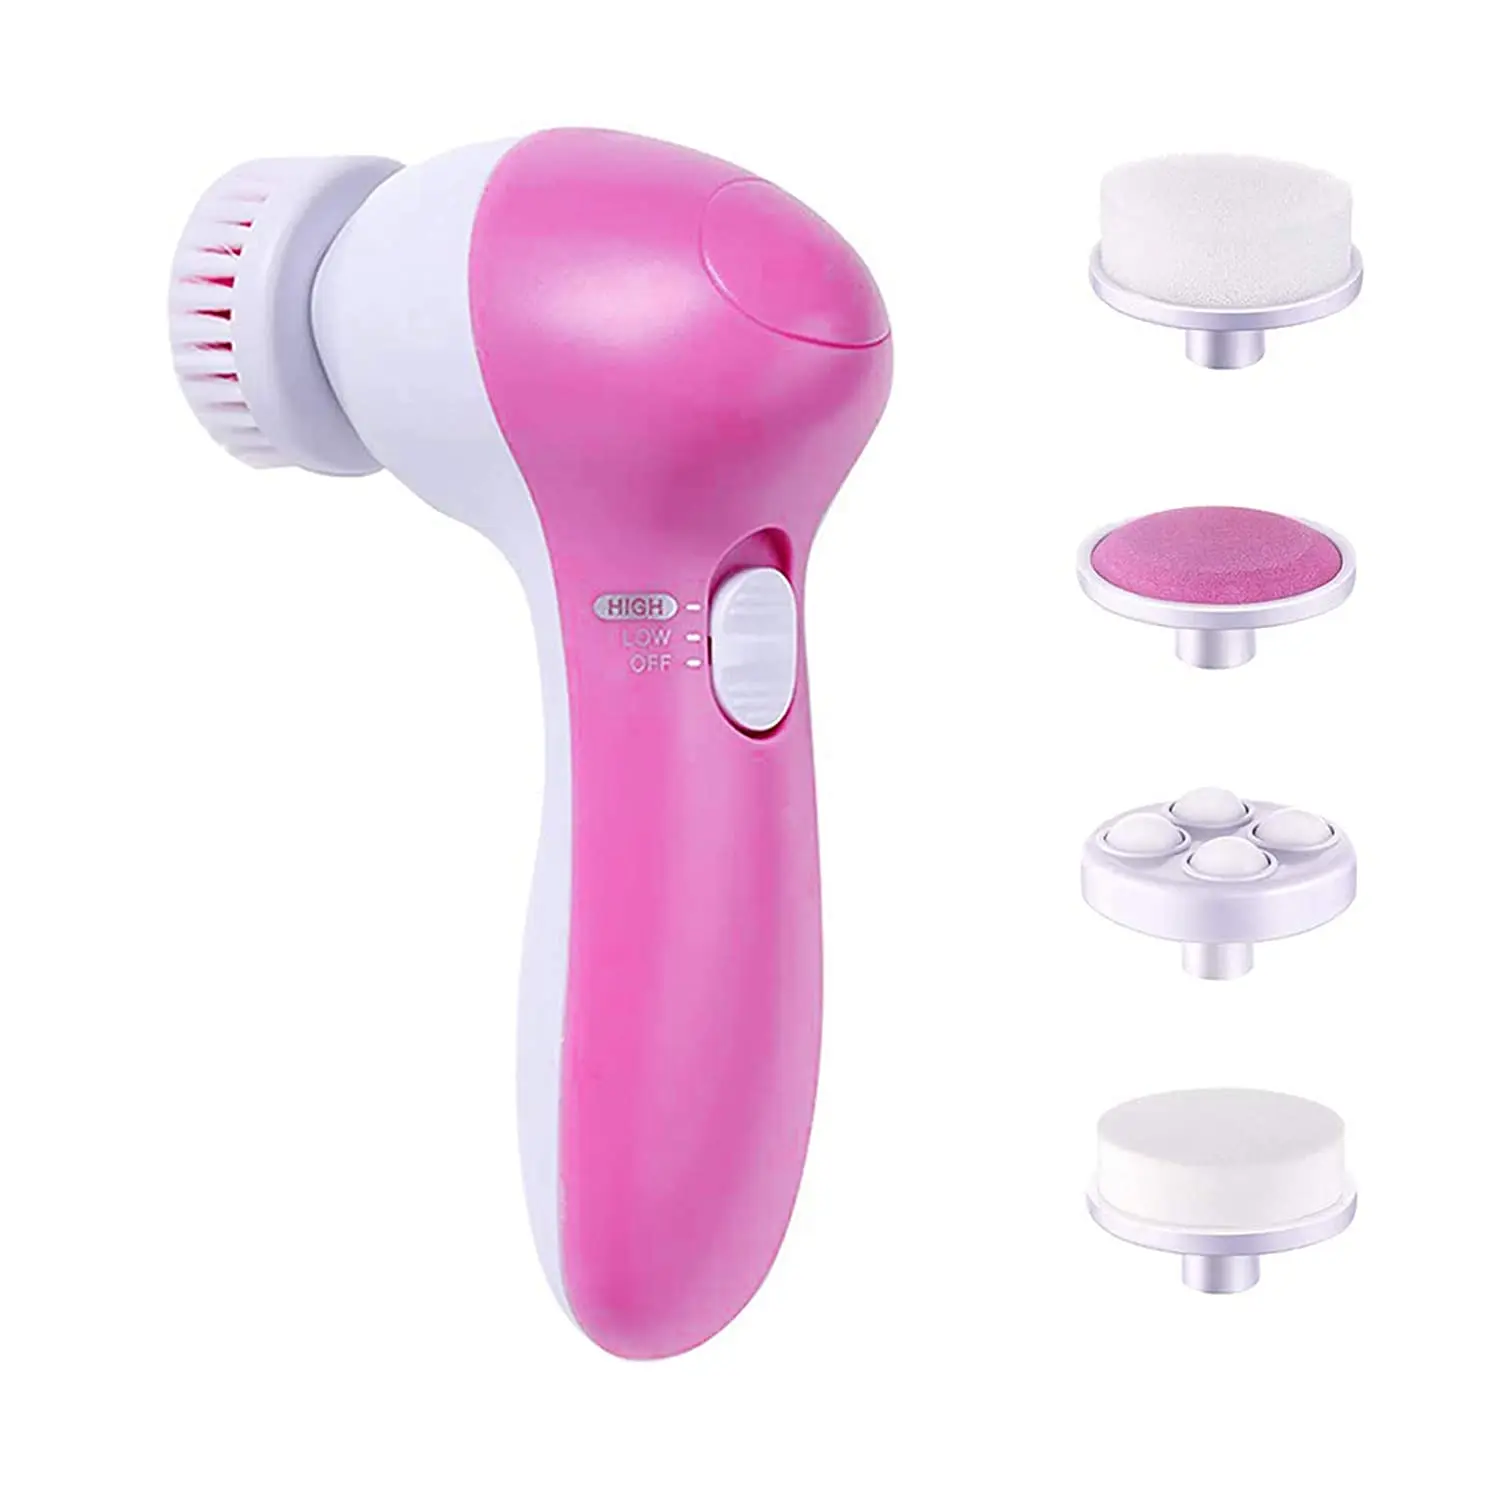 Facial Cleansing Brush Waterproof Face Spin Brush Set With 5 Brush Heads Gentle Exfoliating & Removing Blackhead Deep Cleansing electric facial cleansing brush 2 speeds adjust facial exfoliating massage brush with 3 heads for deep clean removing blackhead